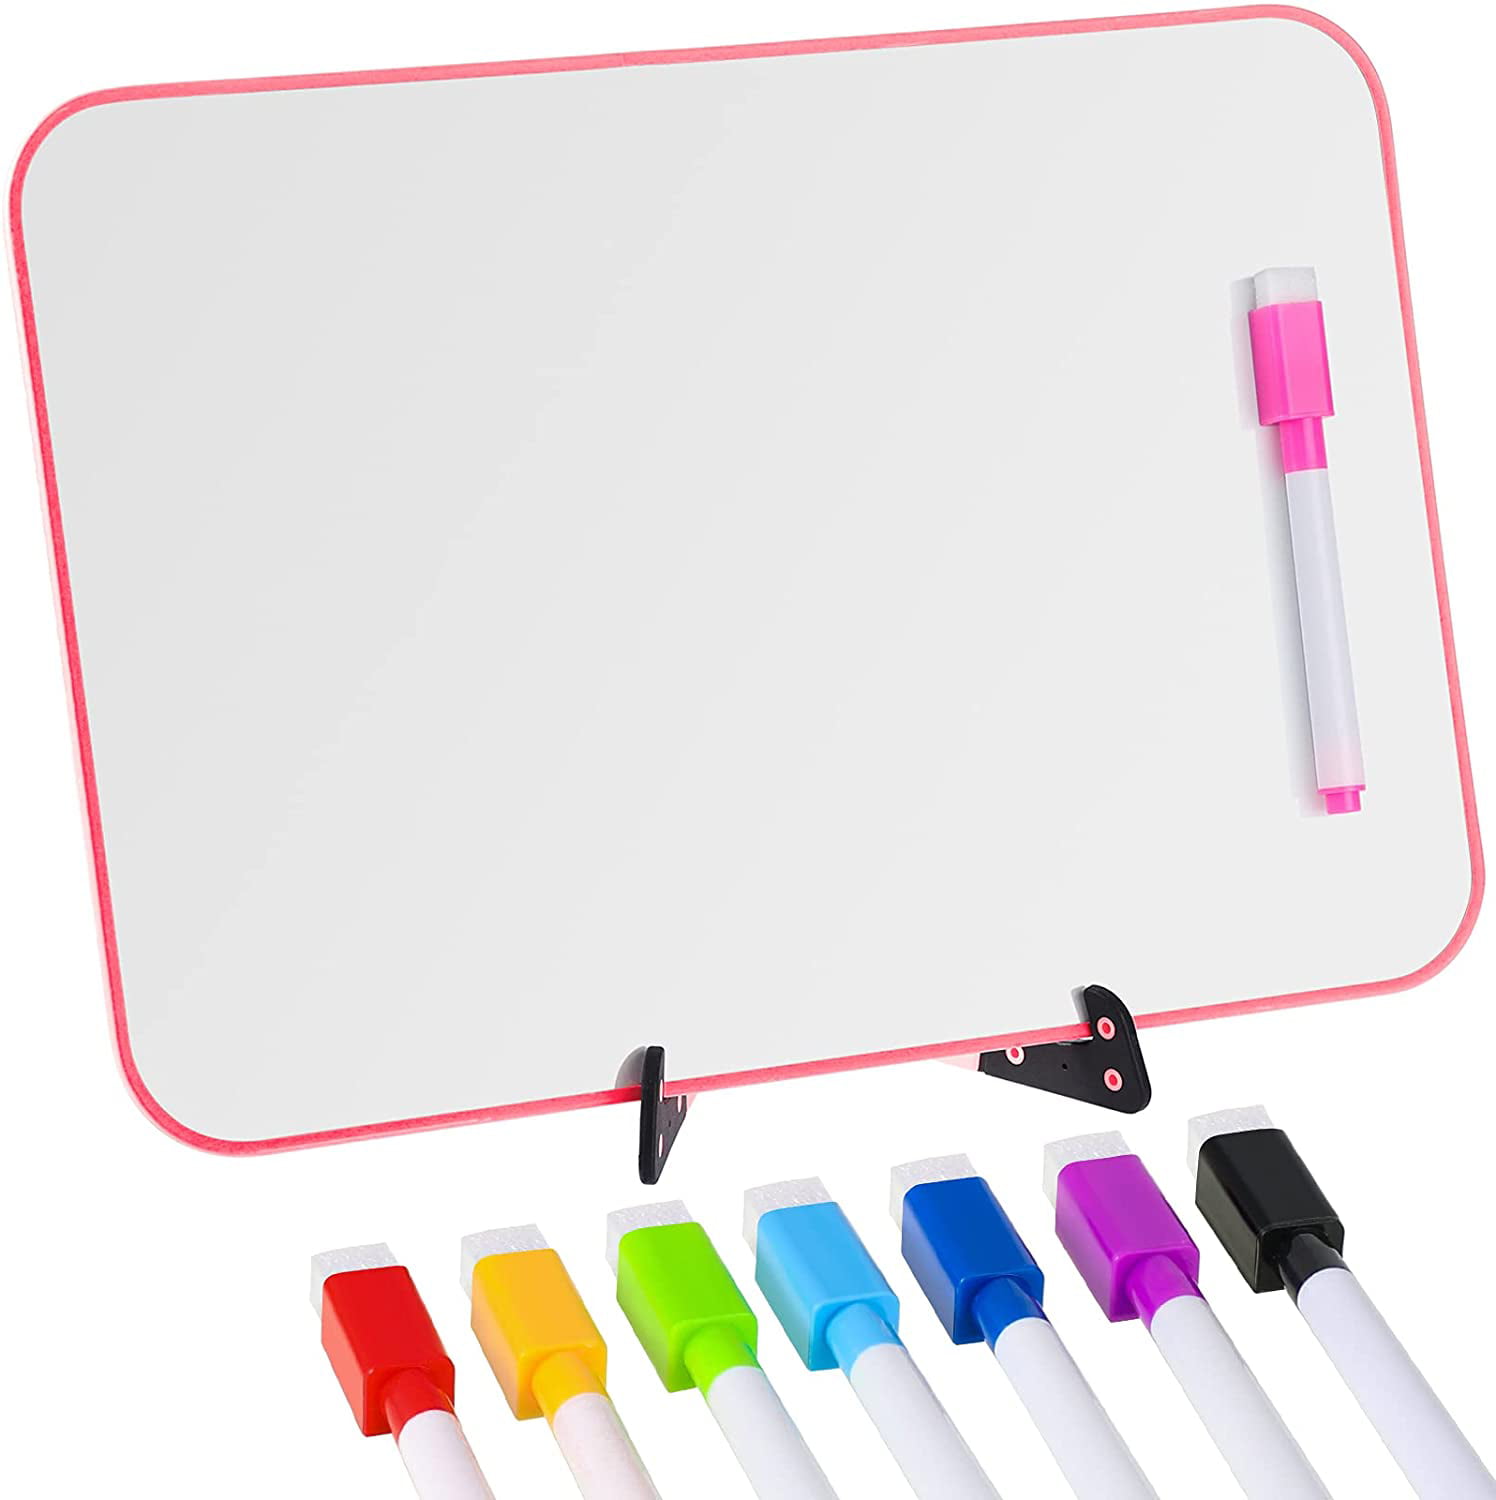 Table Top Magnetic Dry Erase Whiteboard Easel Incudes 8 Dry Erase Colour pens & Magnetic Eraser